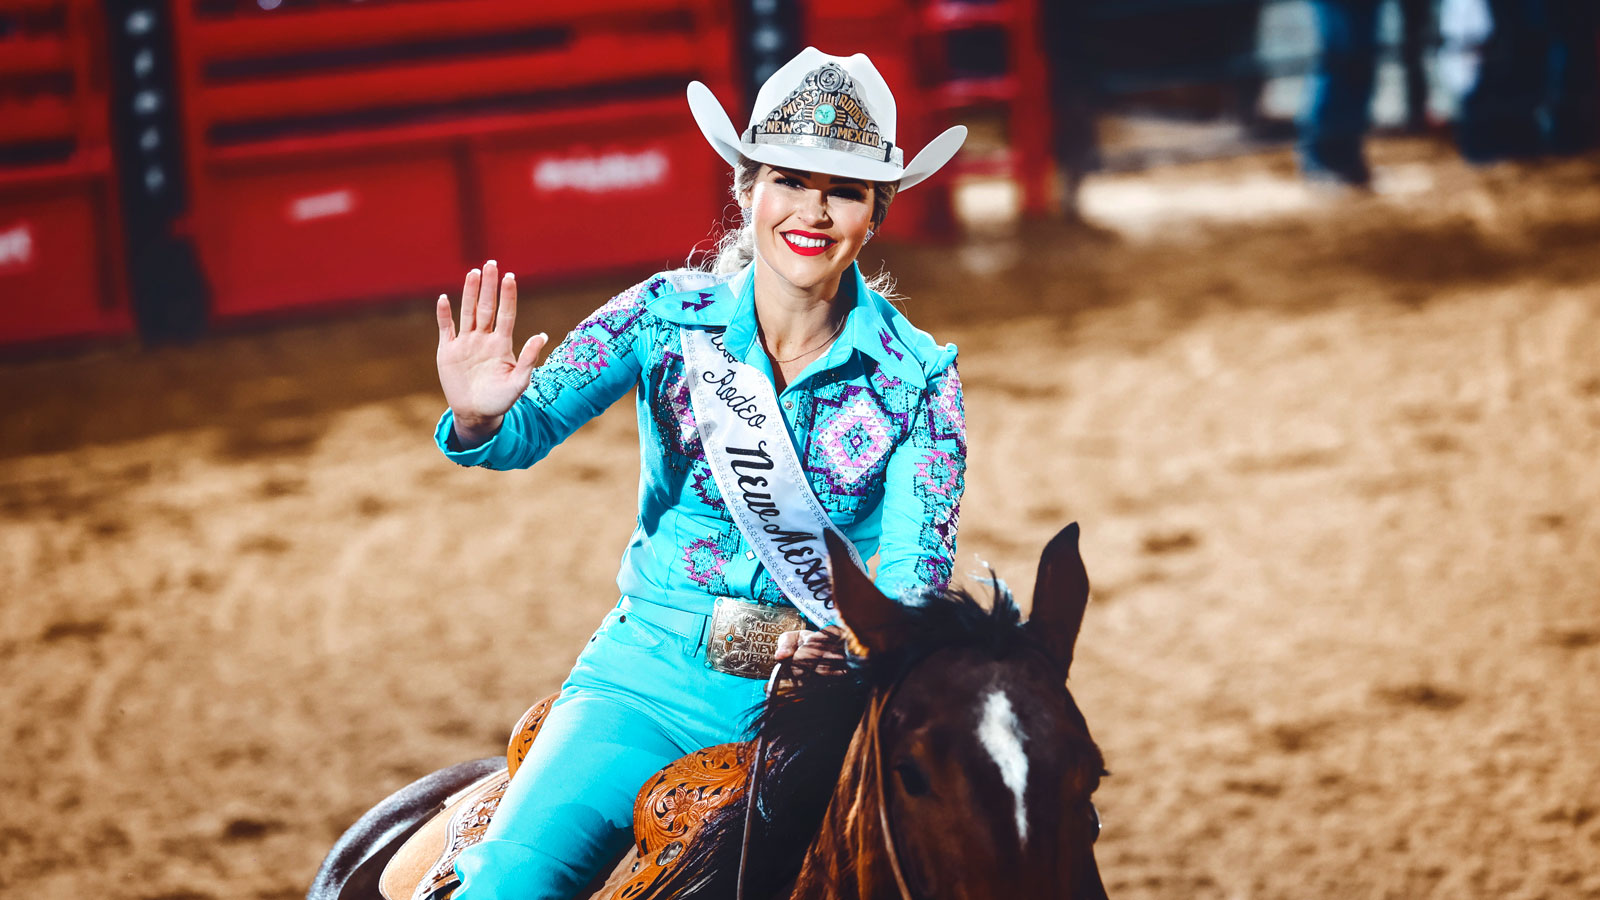 Emma Cameron riding a horse during the Miss Rodeo America competition